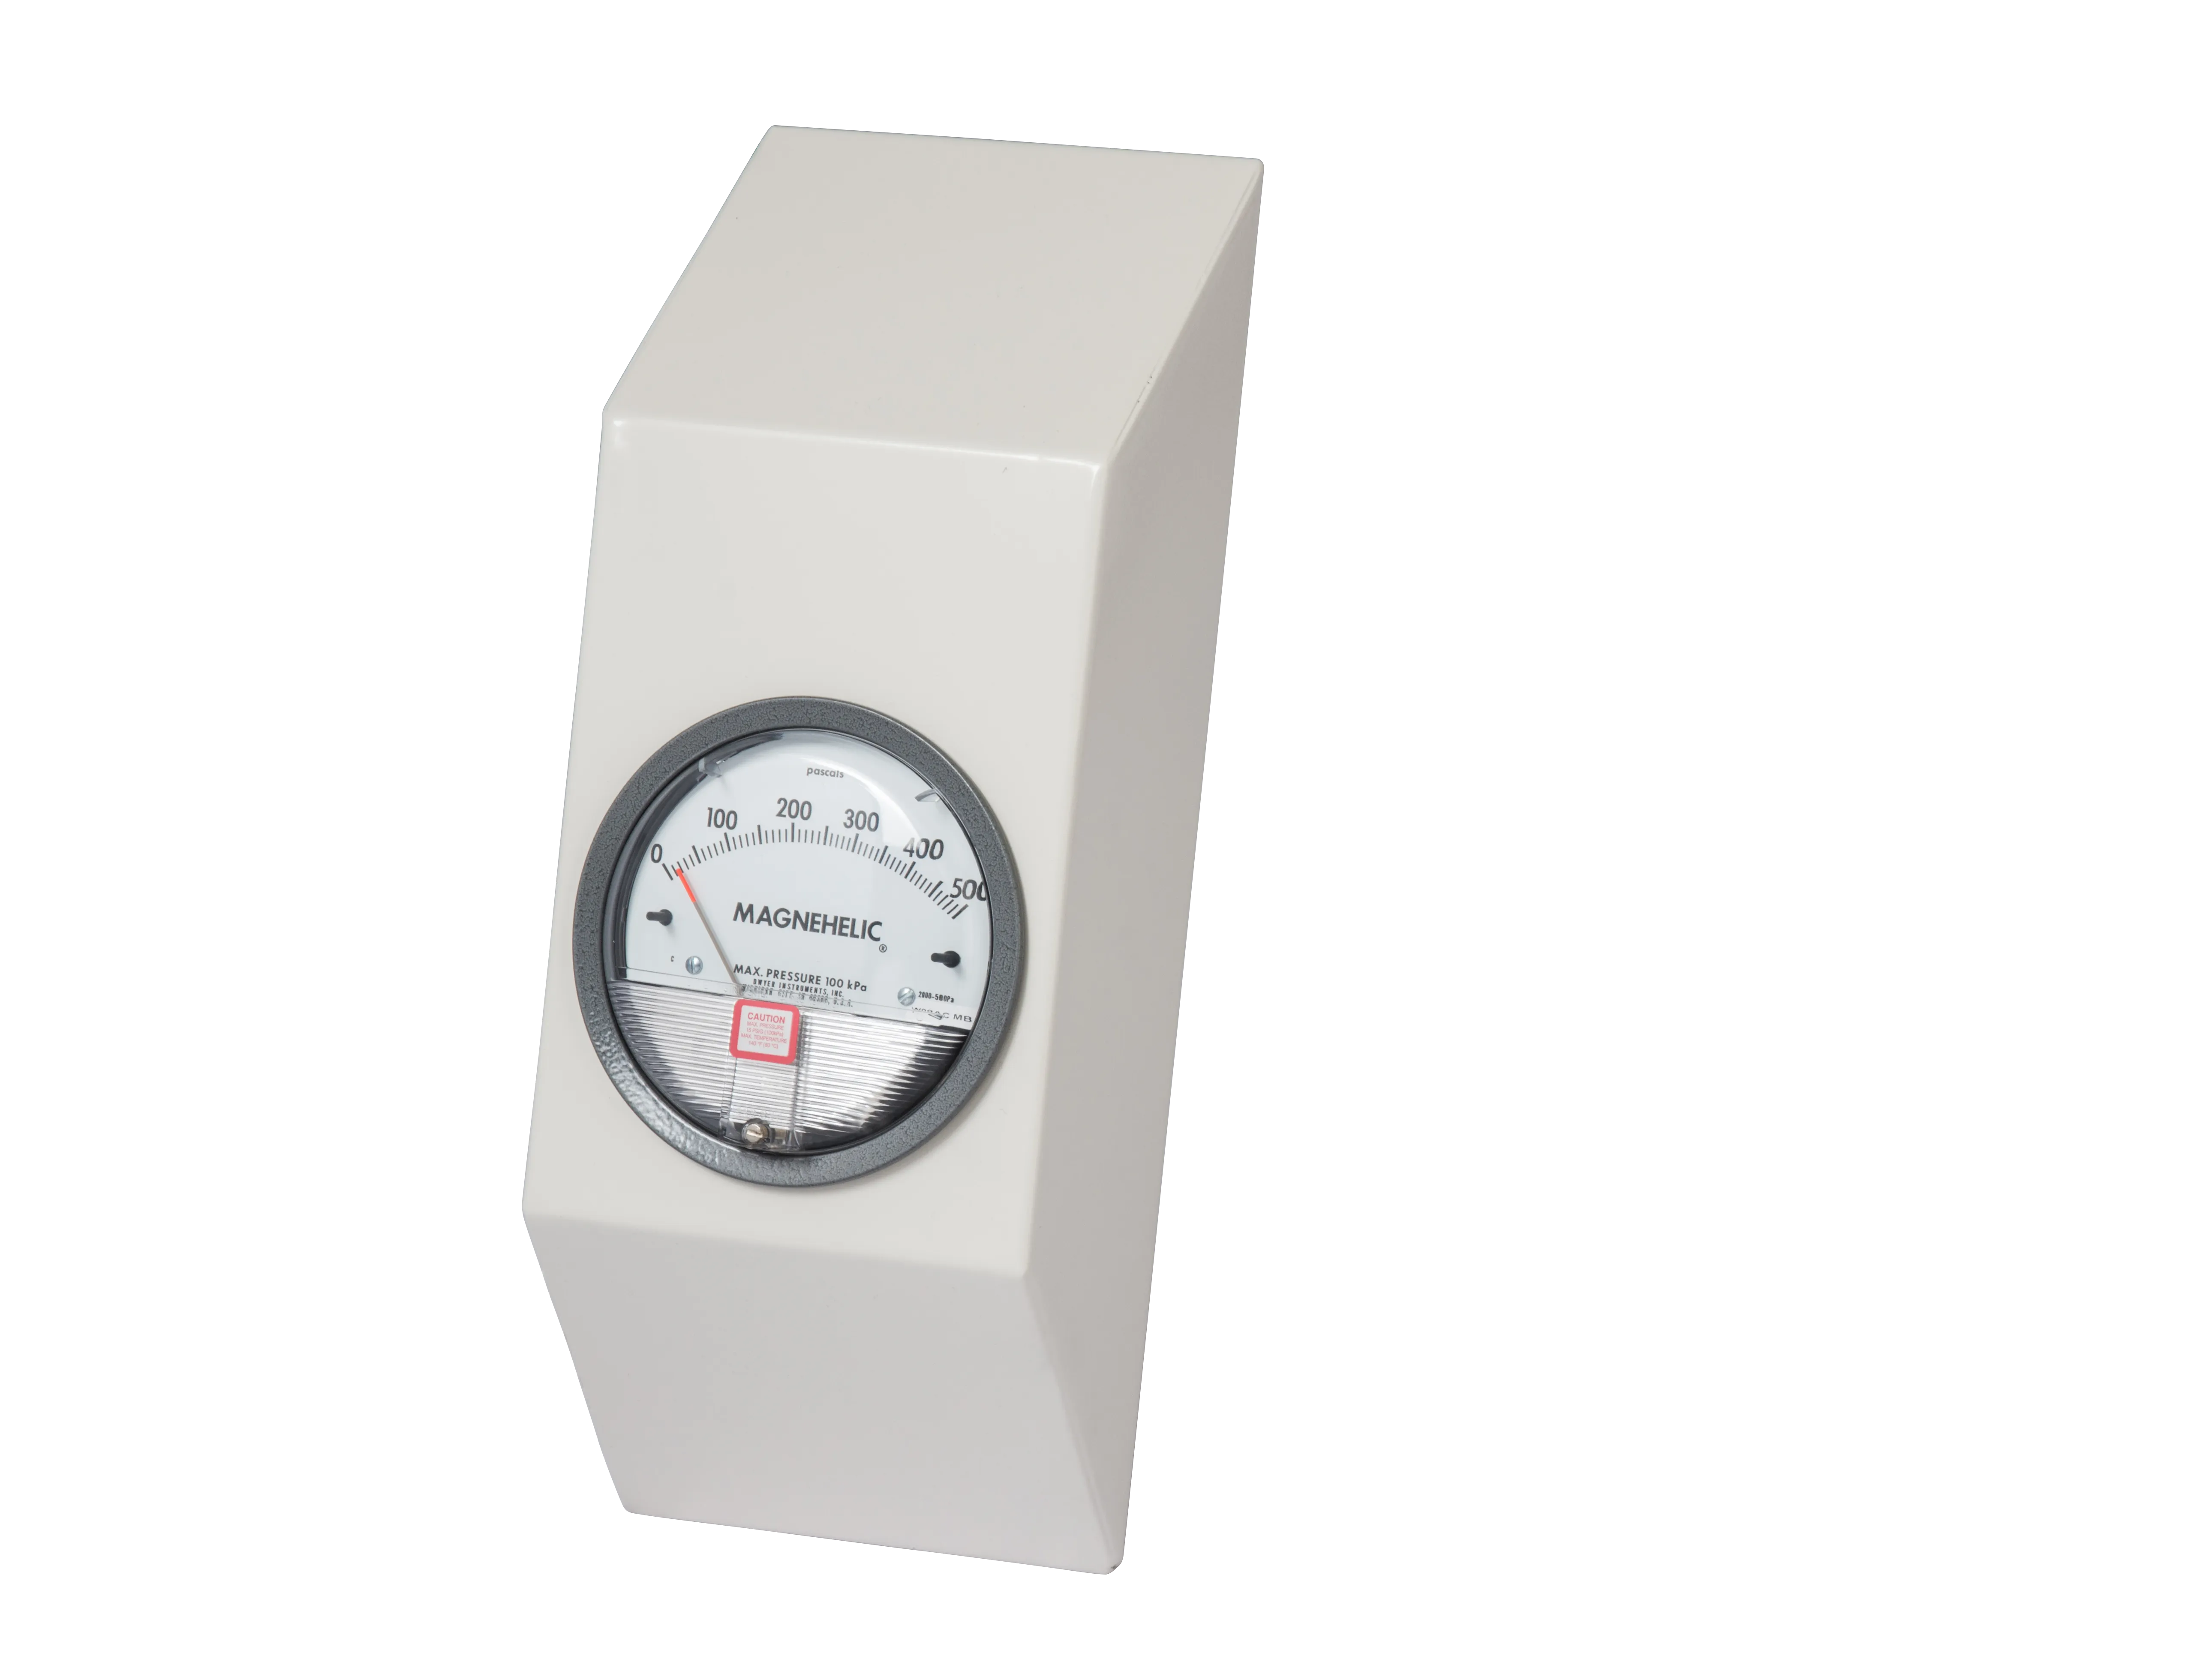 Magnehelic Gauge with Cover - MAG Series